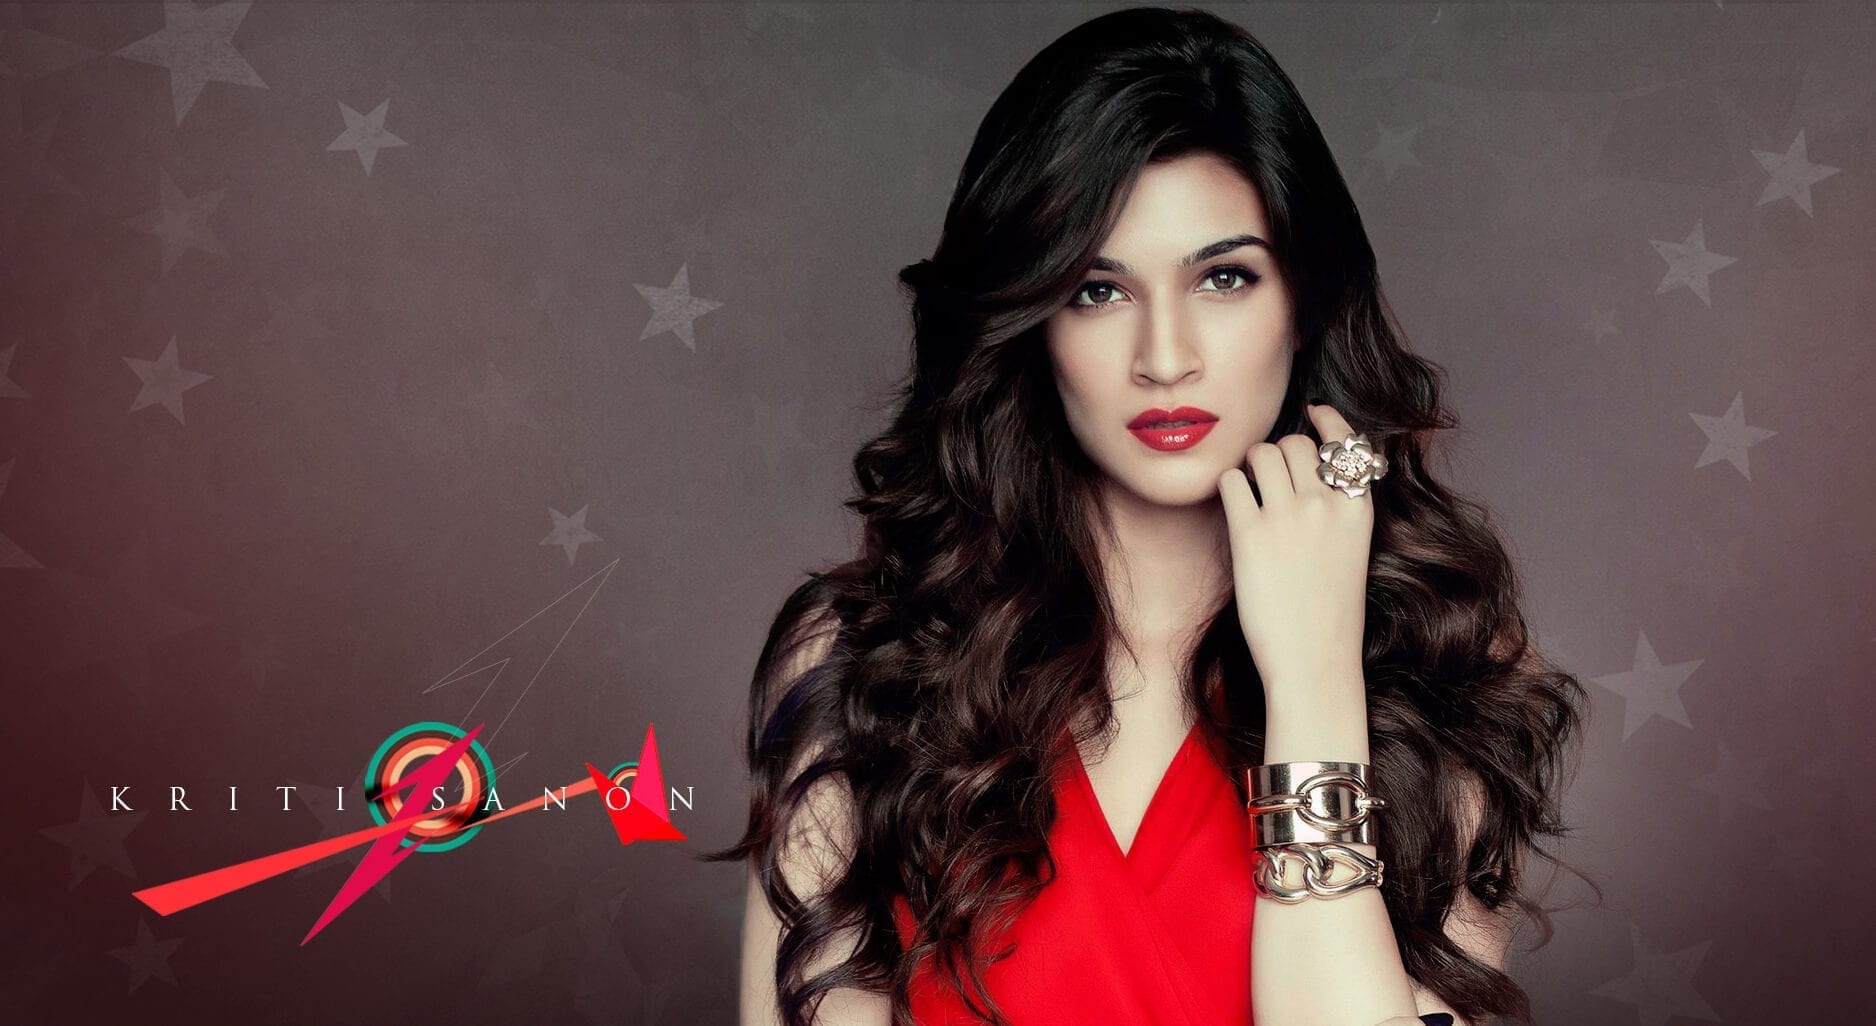 How to Meet Kriti Sanon In Person and Face to Face